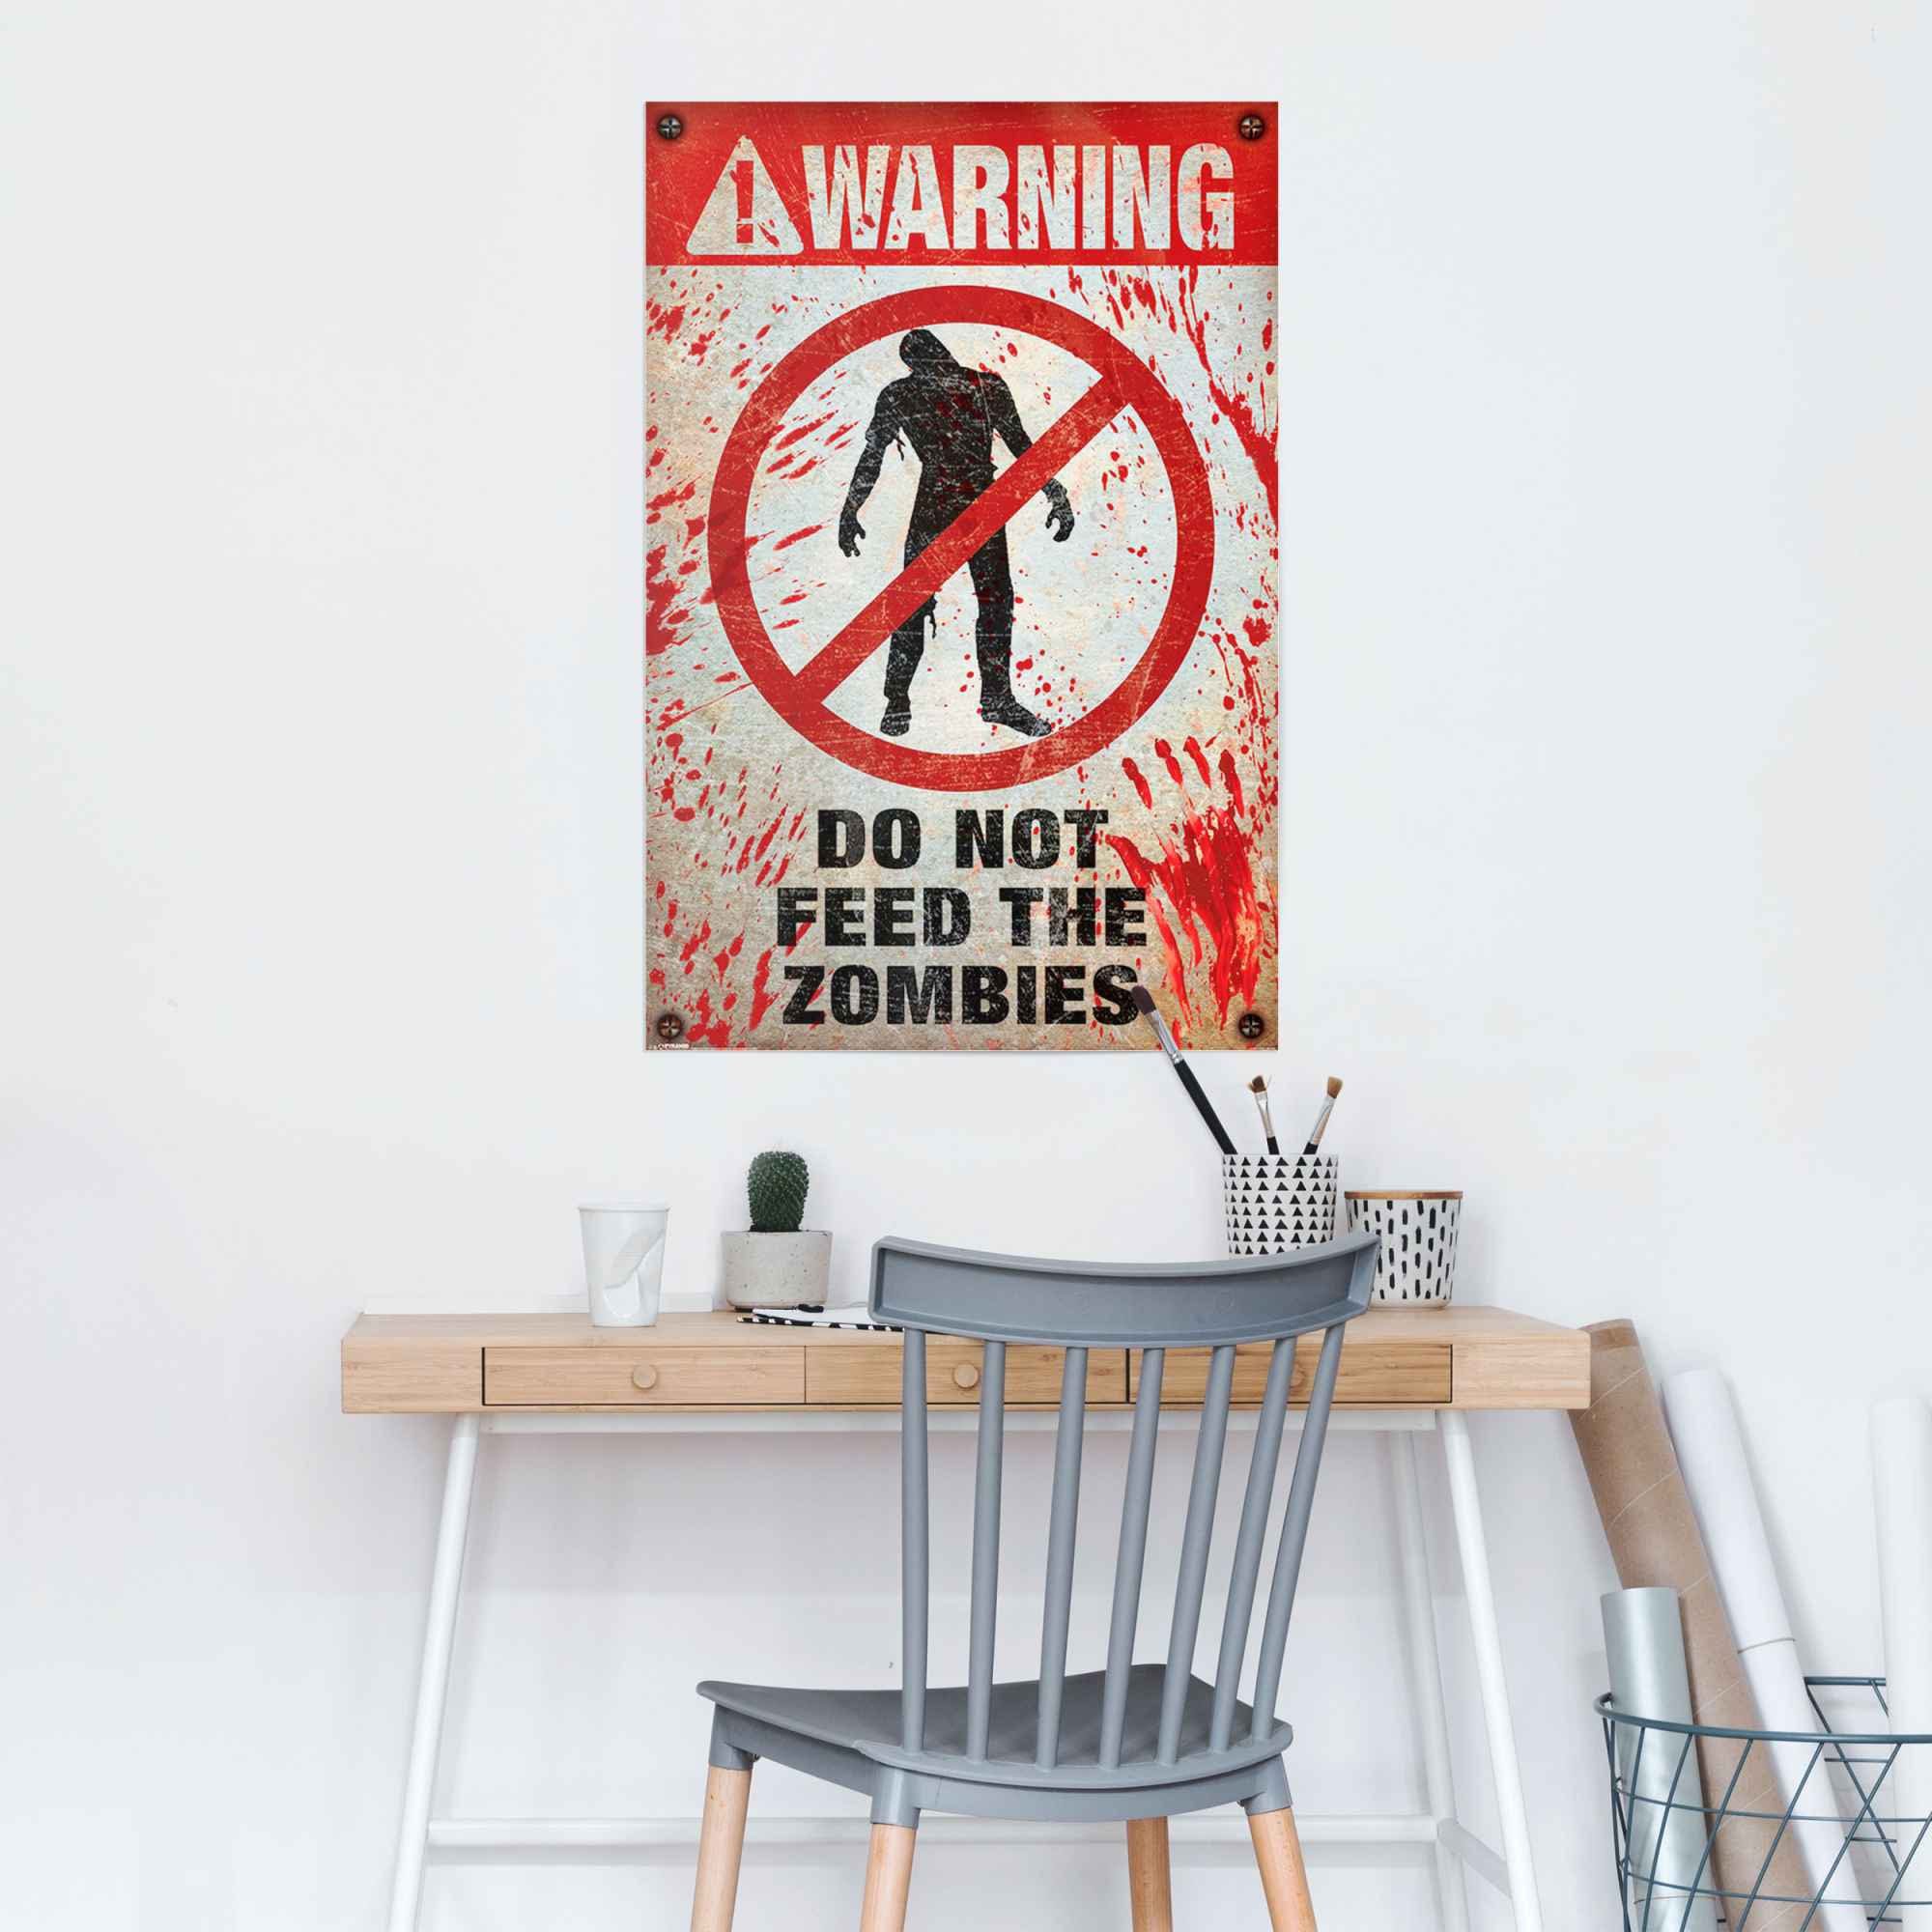 Not The Warning! St) Reinders! Zombies, (1 Do Poster Feed